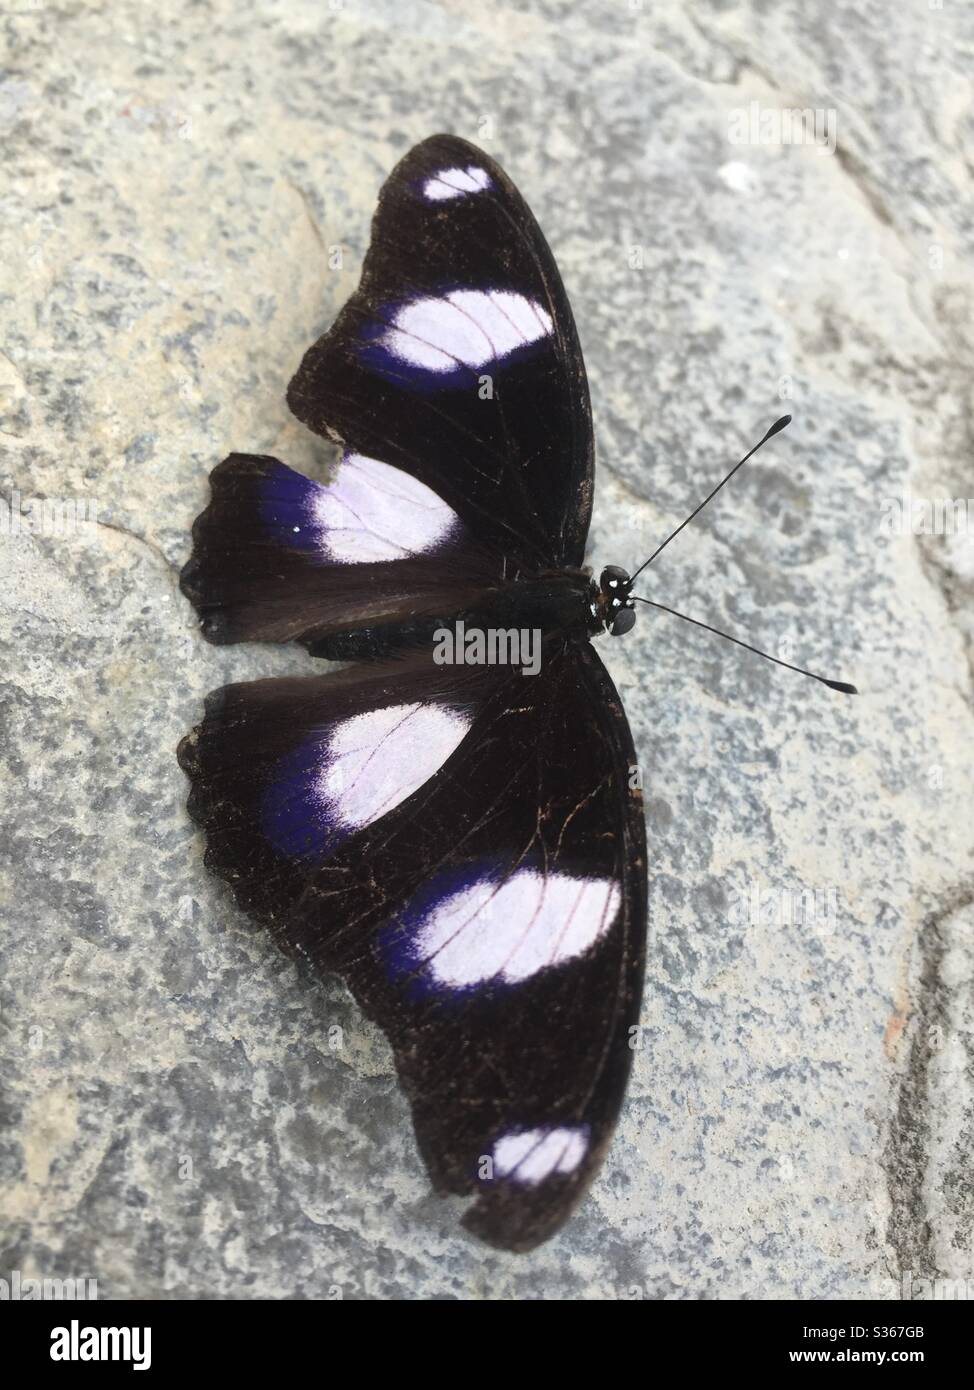 A capture of a butterfly resting after a stroll through the winds, showing off its unique patterns. Stock Photo